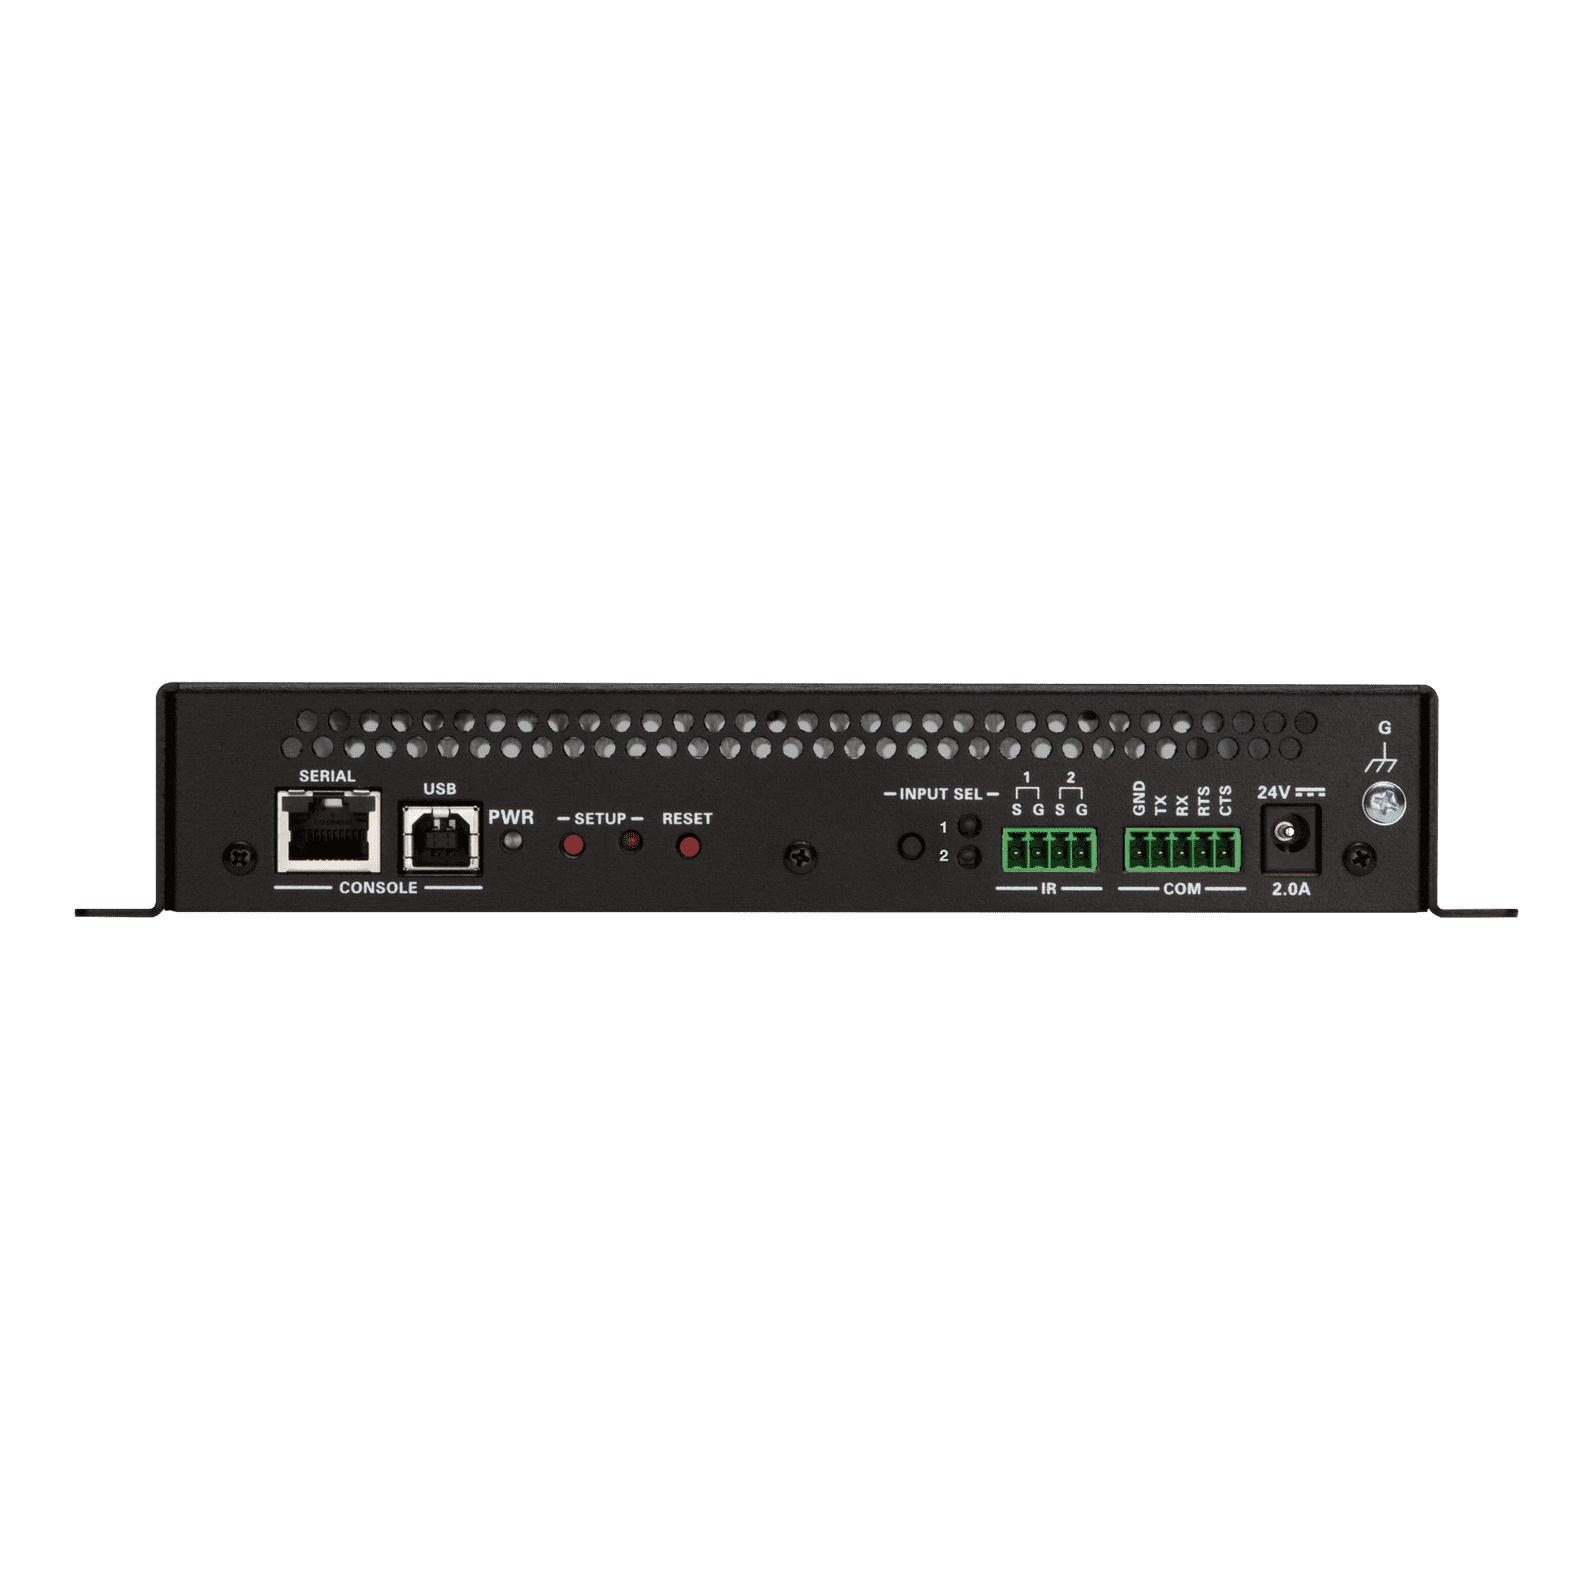 Get Crestron DM NVX® 4K60 4:4:4 HDR Network AV Encoder/Decoder with Downmixing from Malaysia Distributor - vnetwork